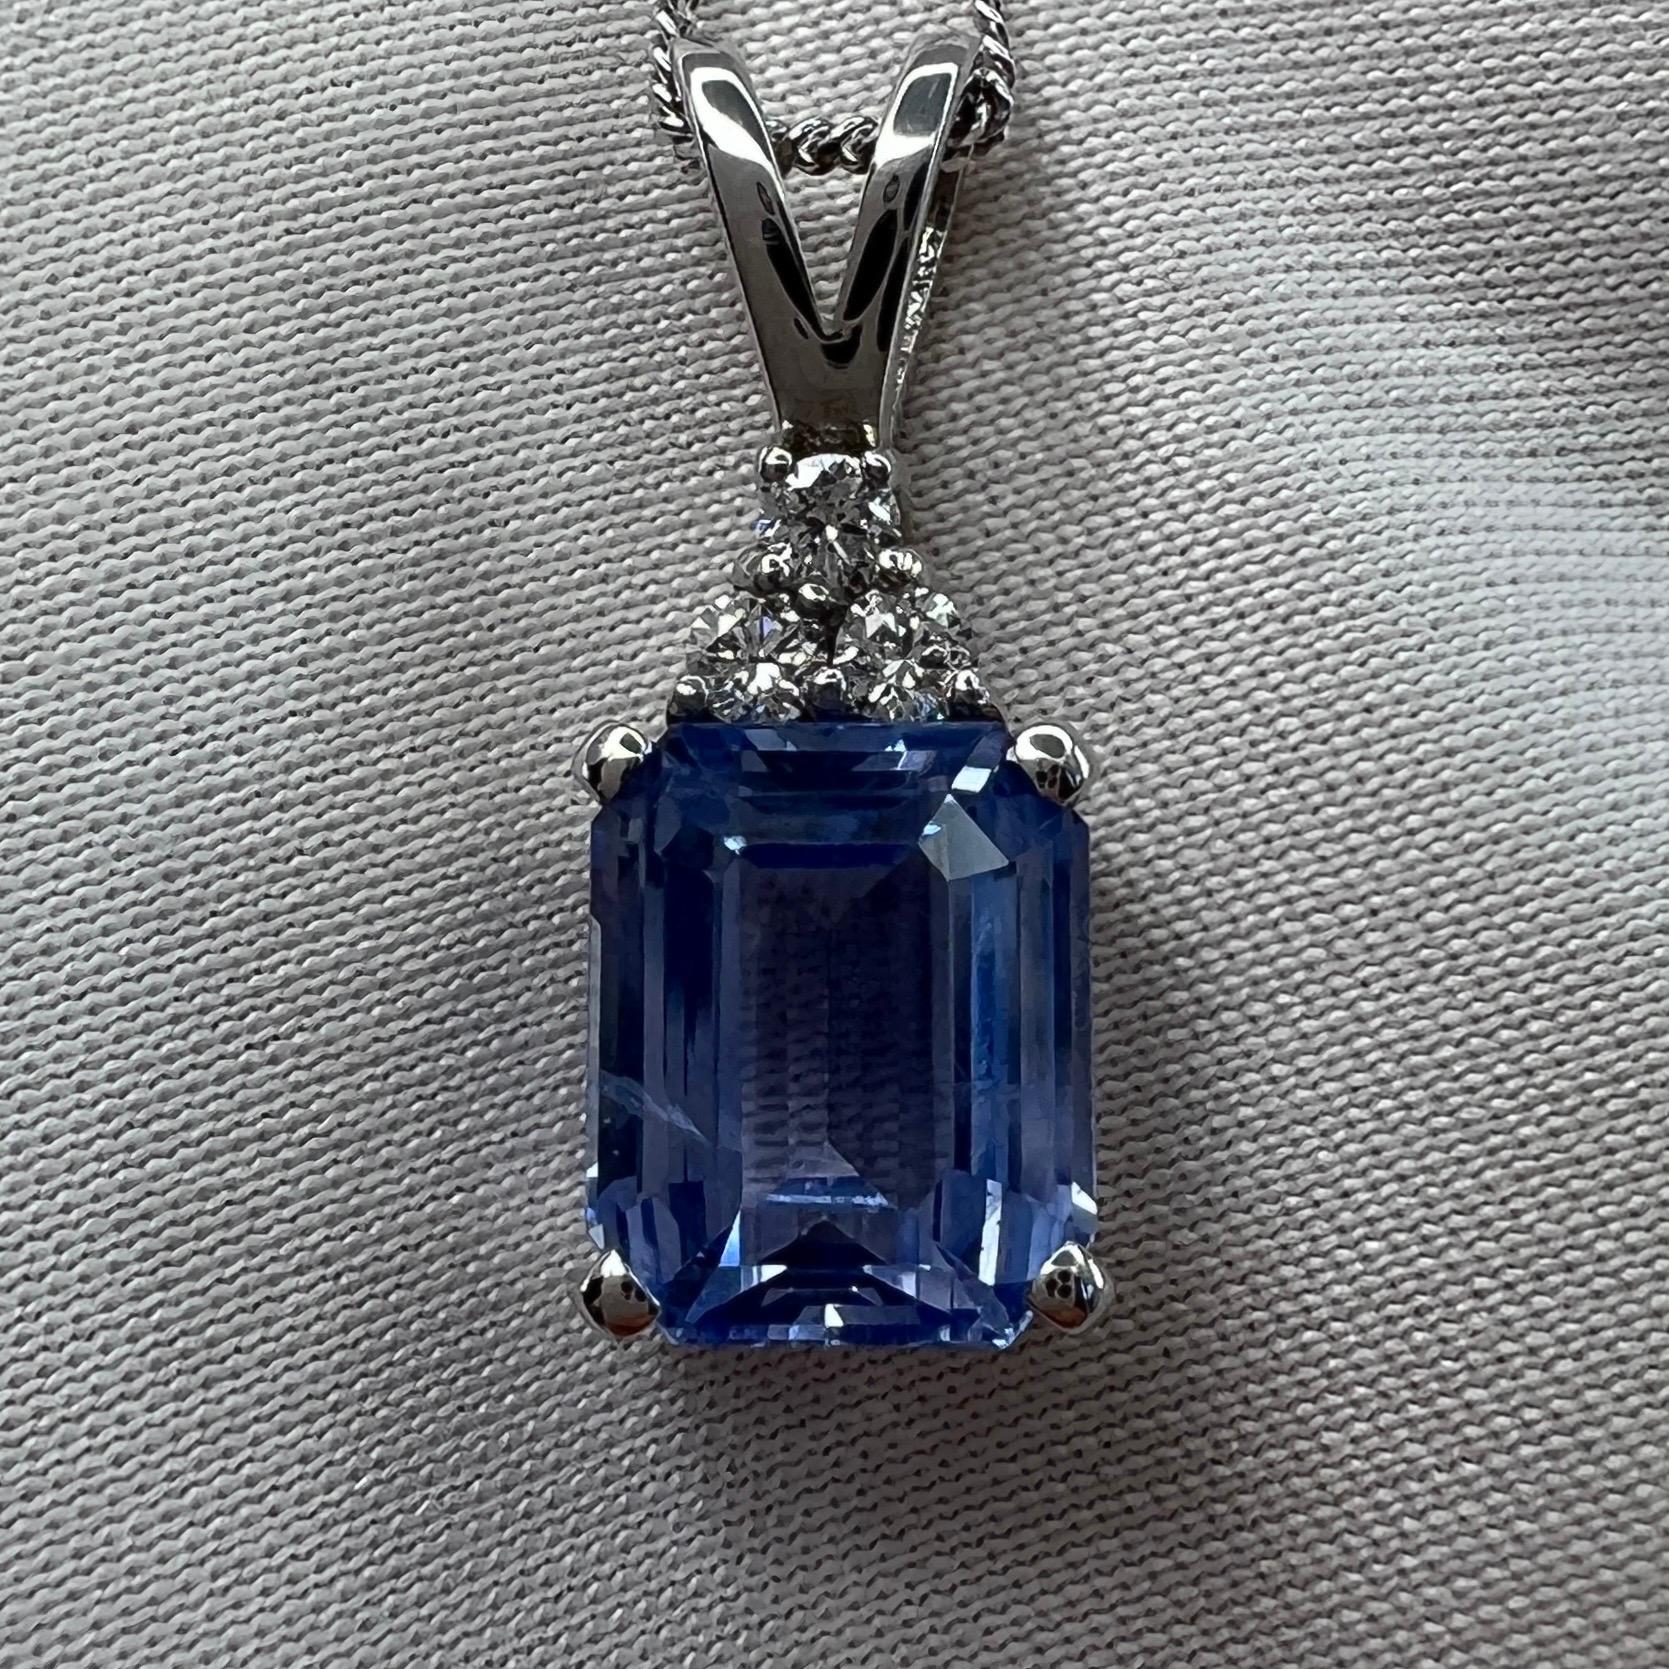 GIA Certified Untreated Vivid Blue Ceylon Sapphire & Diamond 18k White Gold Pendant Necklace.

A fine untreated 2.52 Carat emerald cut sapphire with a stunning vivid blue colour and very good clarity. A clean stone with only some very small natural